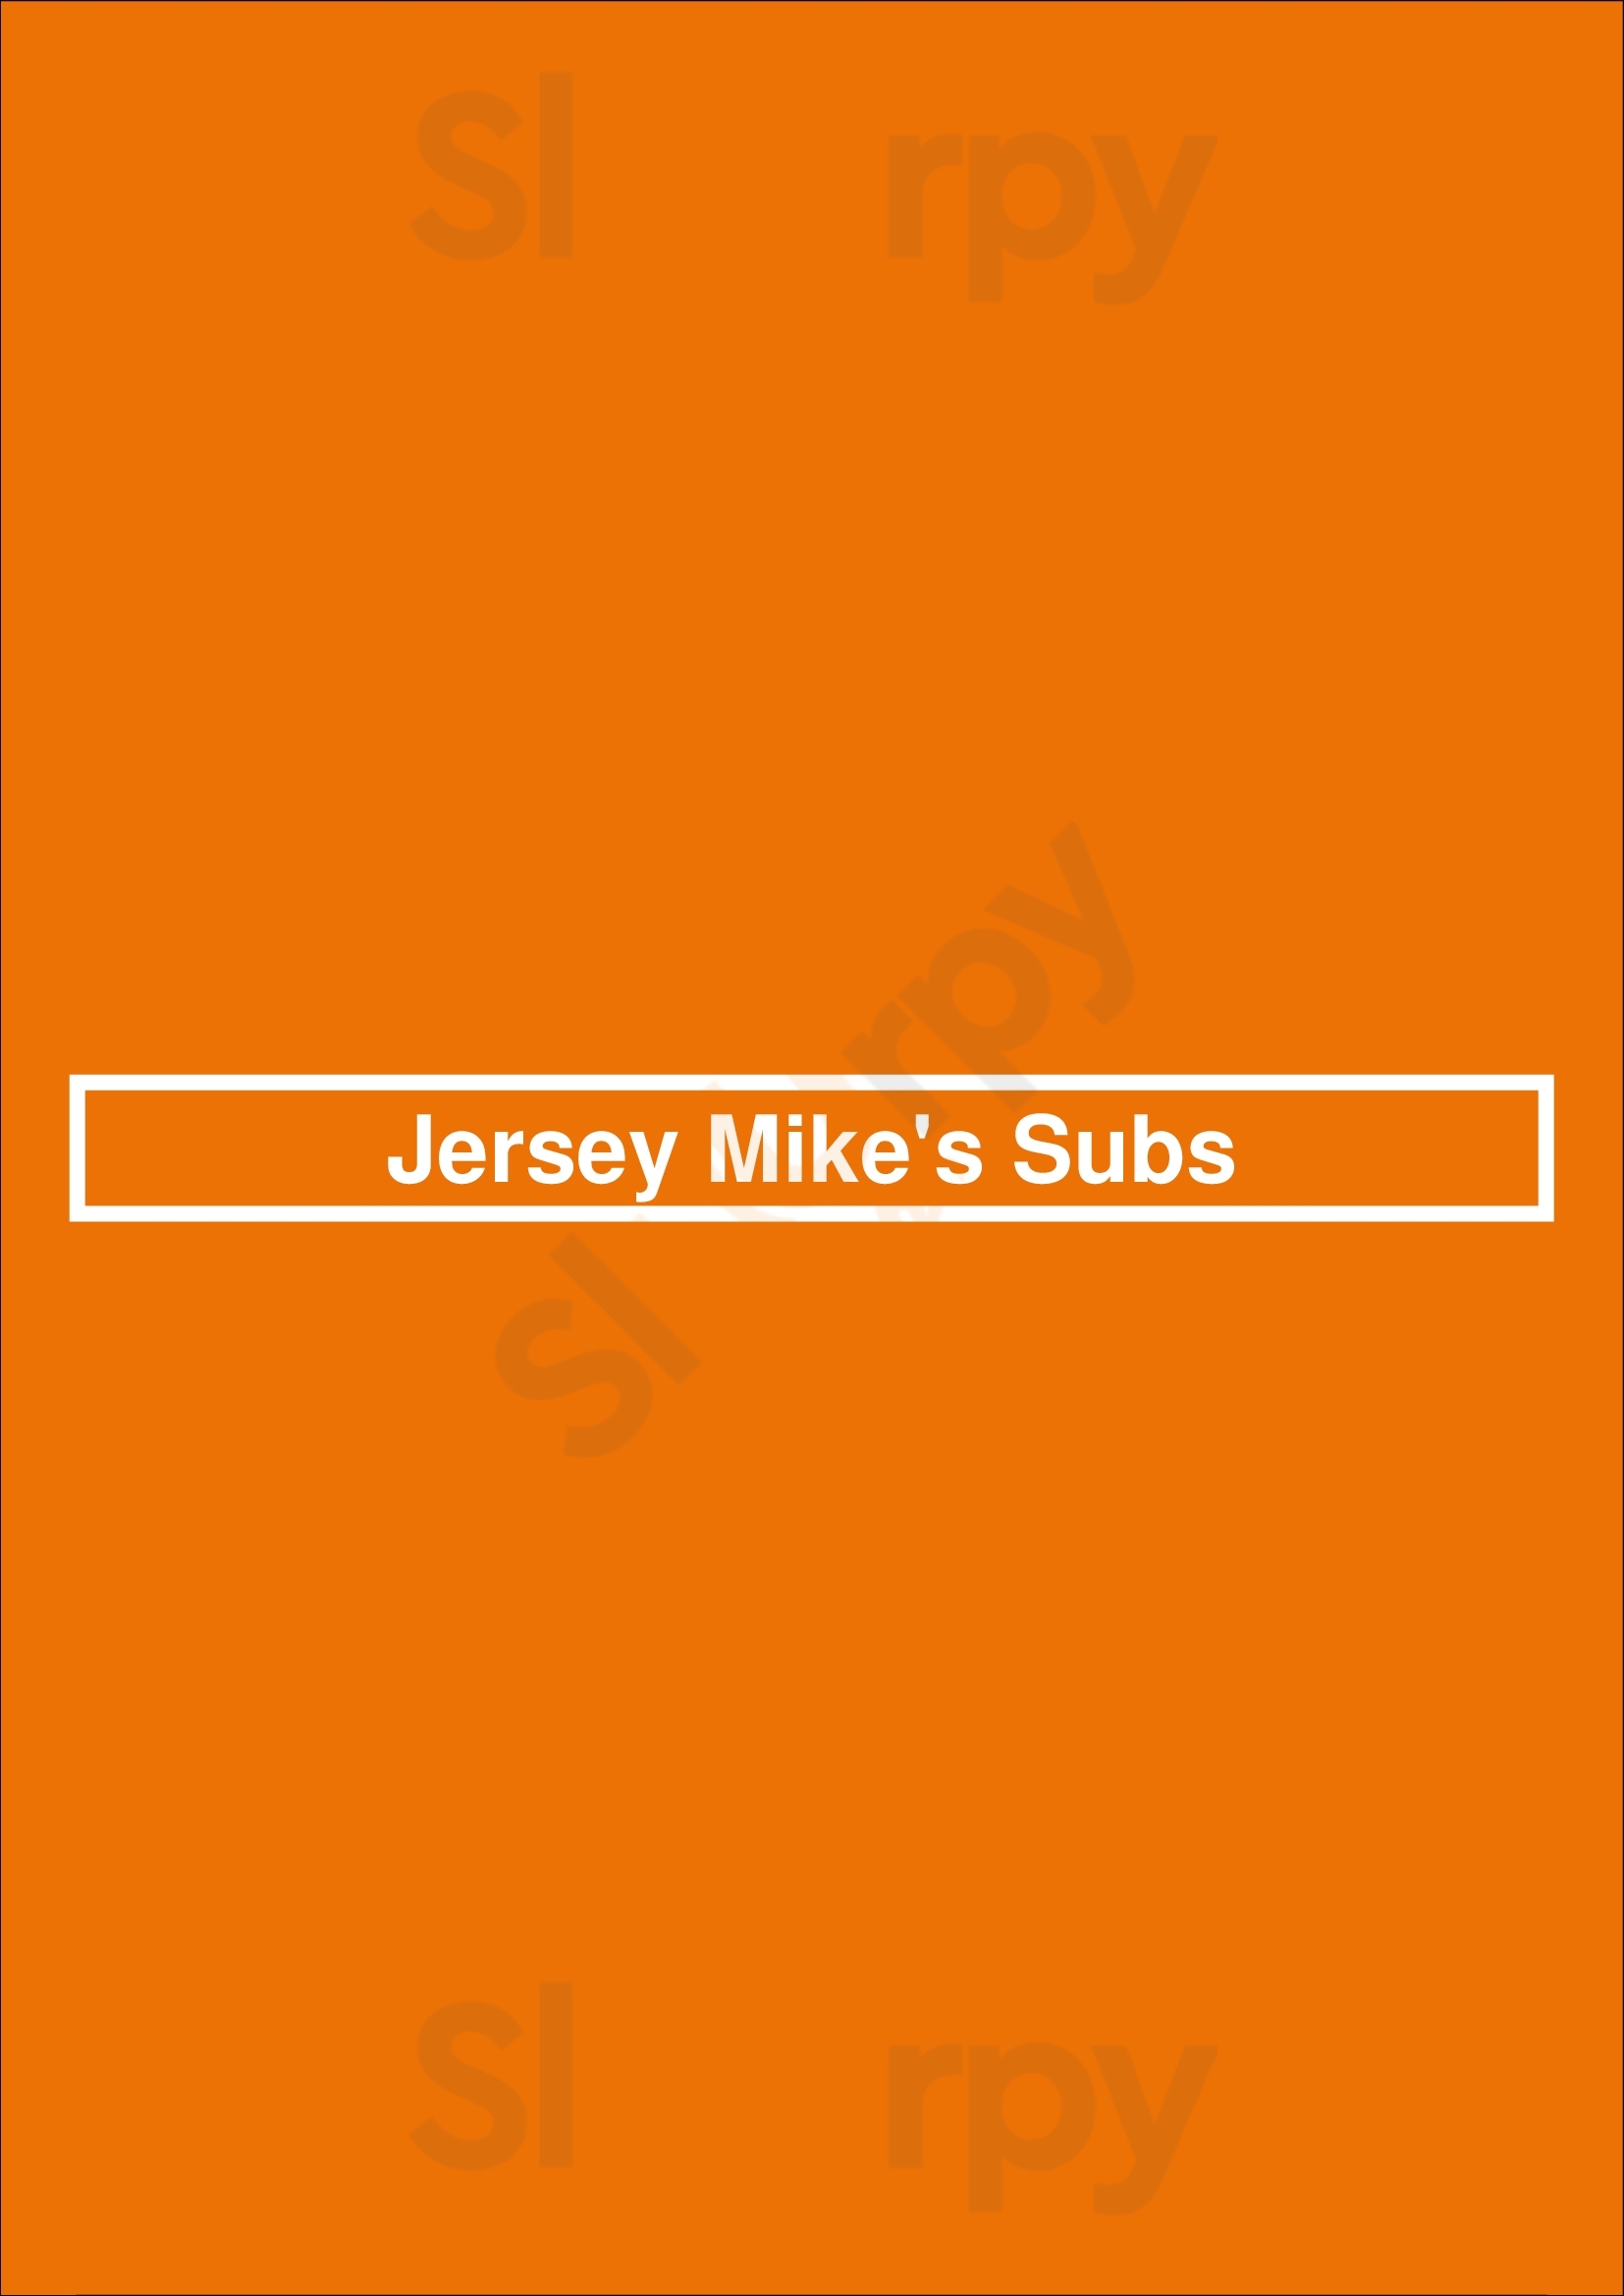 Jersey Mike's Subs Chicago Menu - 1